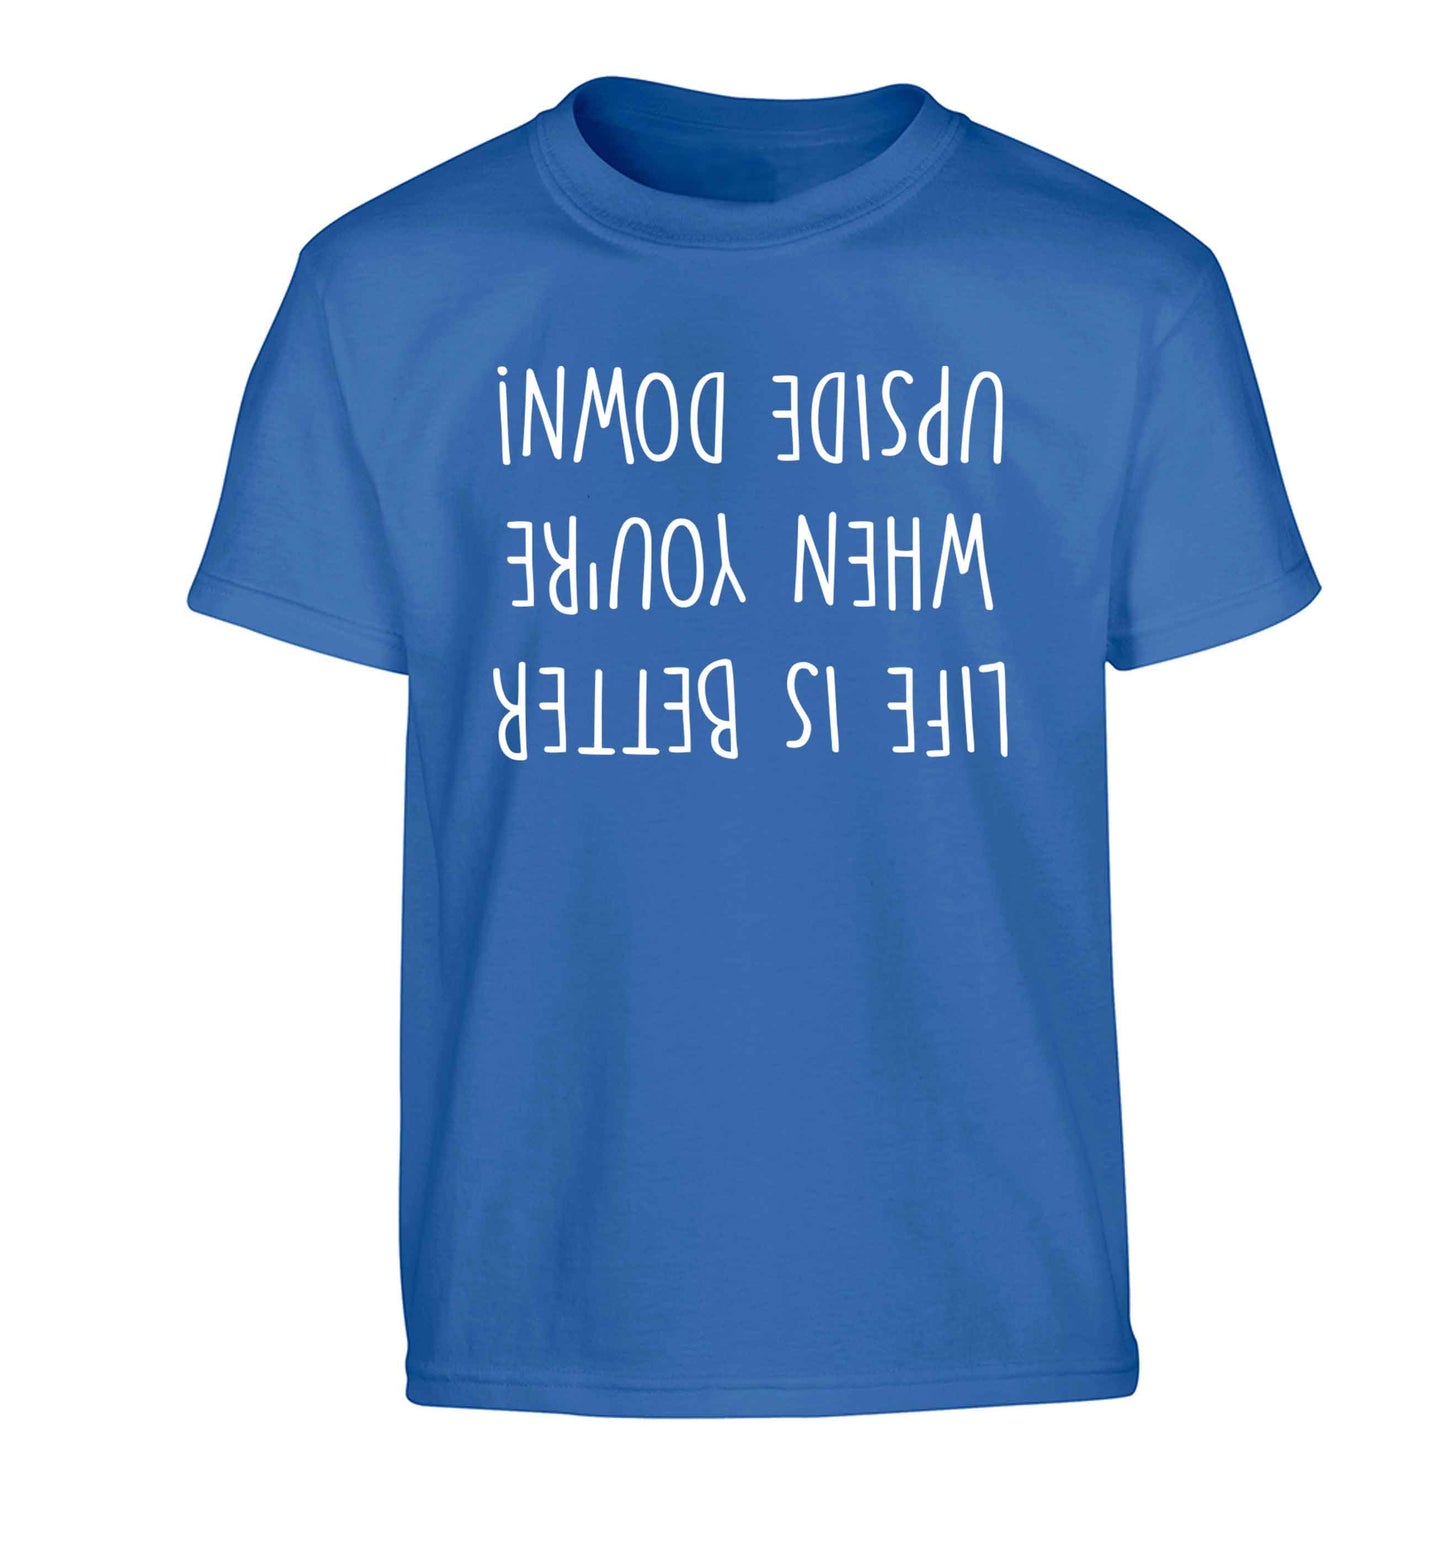 Life is better upside down Children's blue Tshirt 12-13 Years